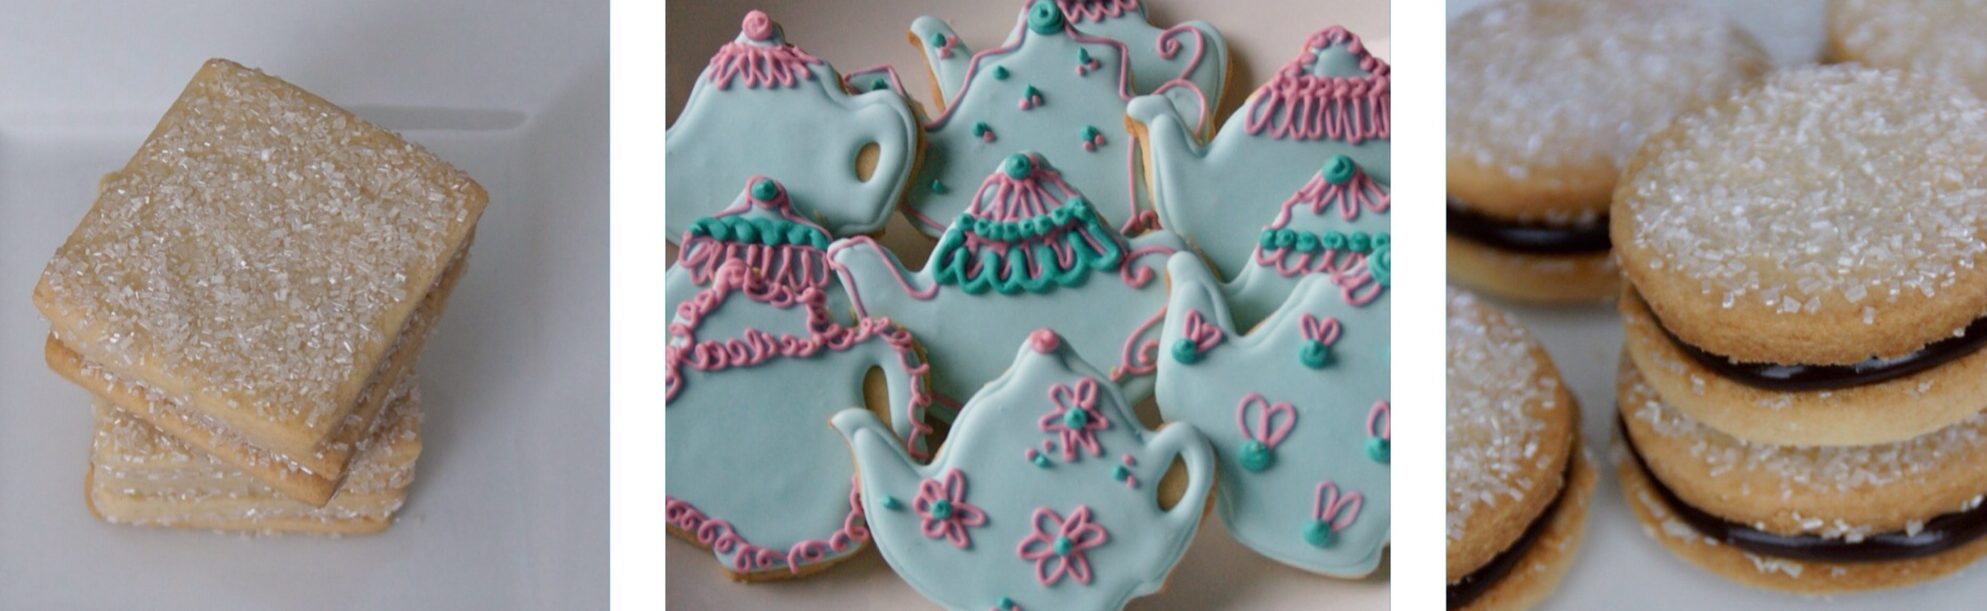 shortbread cookies, 3 ways: Milano, Iced & Sugar, recipes by Mili' Sweets